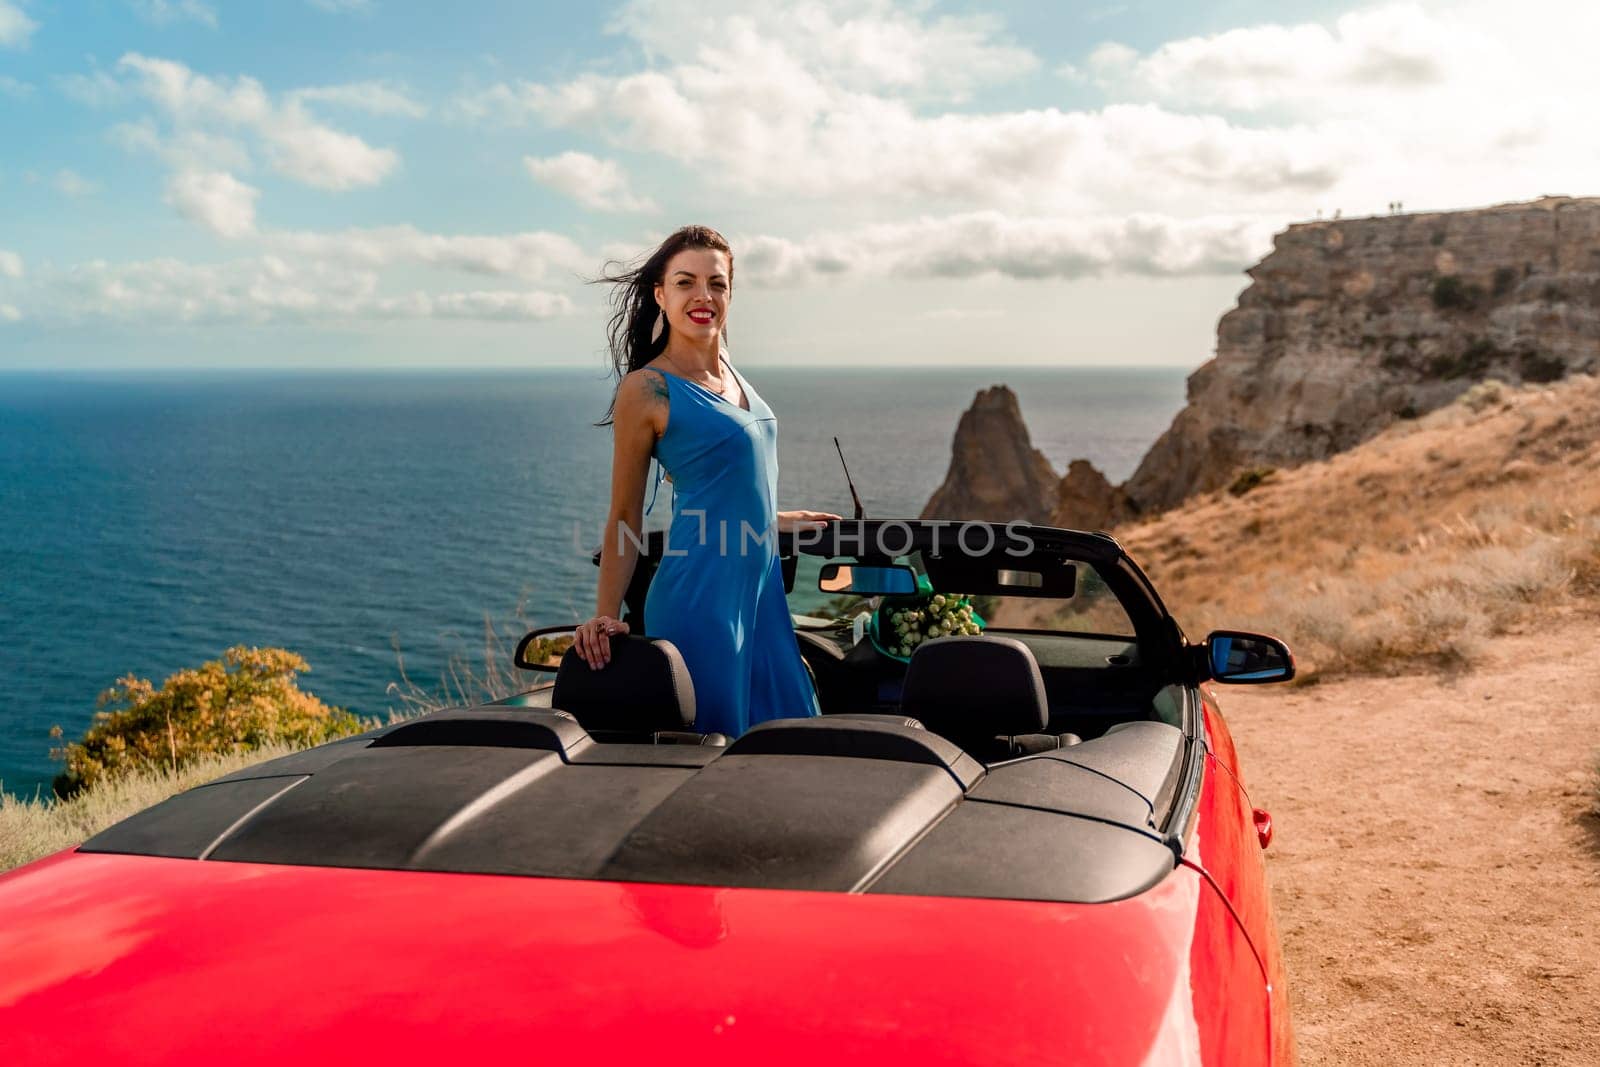 A woman is standing in front of a red convertible car. She is wearing a blue dress and smiling. The scene is set on a beach, with the ocean in the background. Scene is cheerful and relaxed. by Matiunina